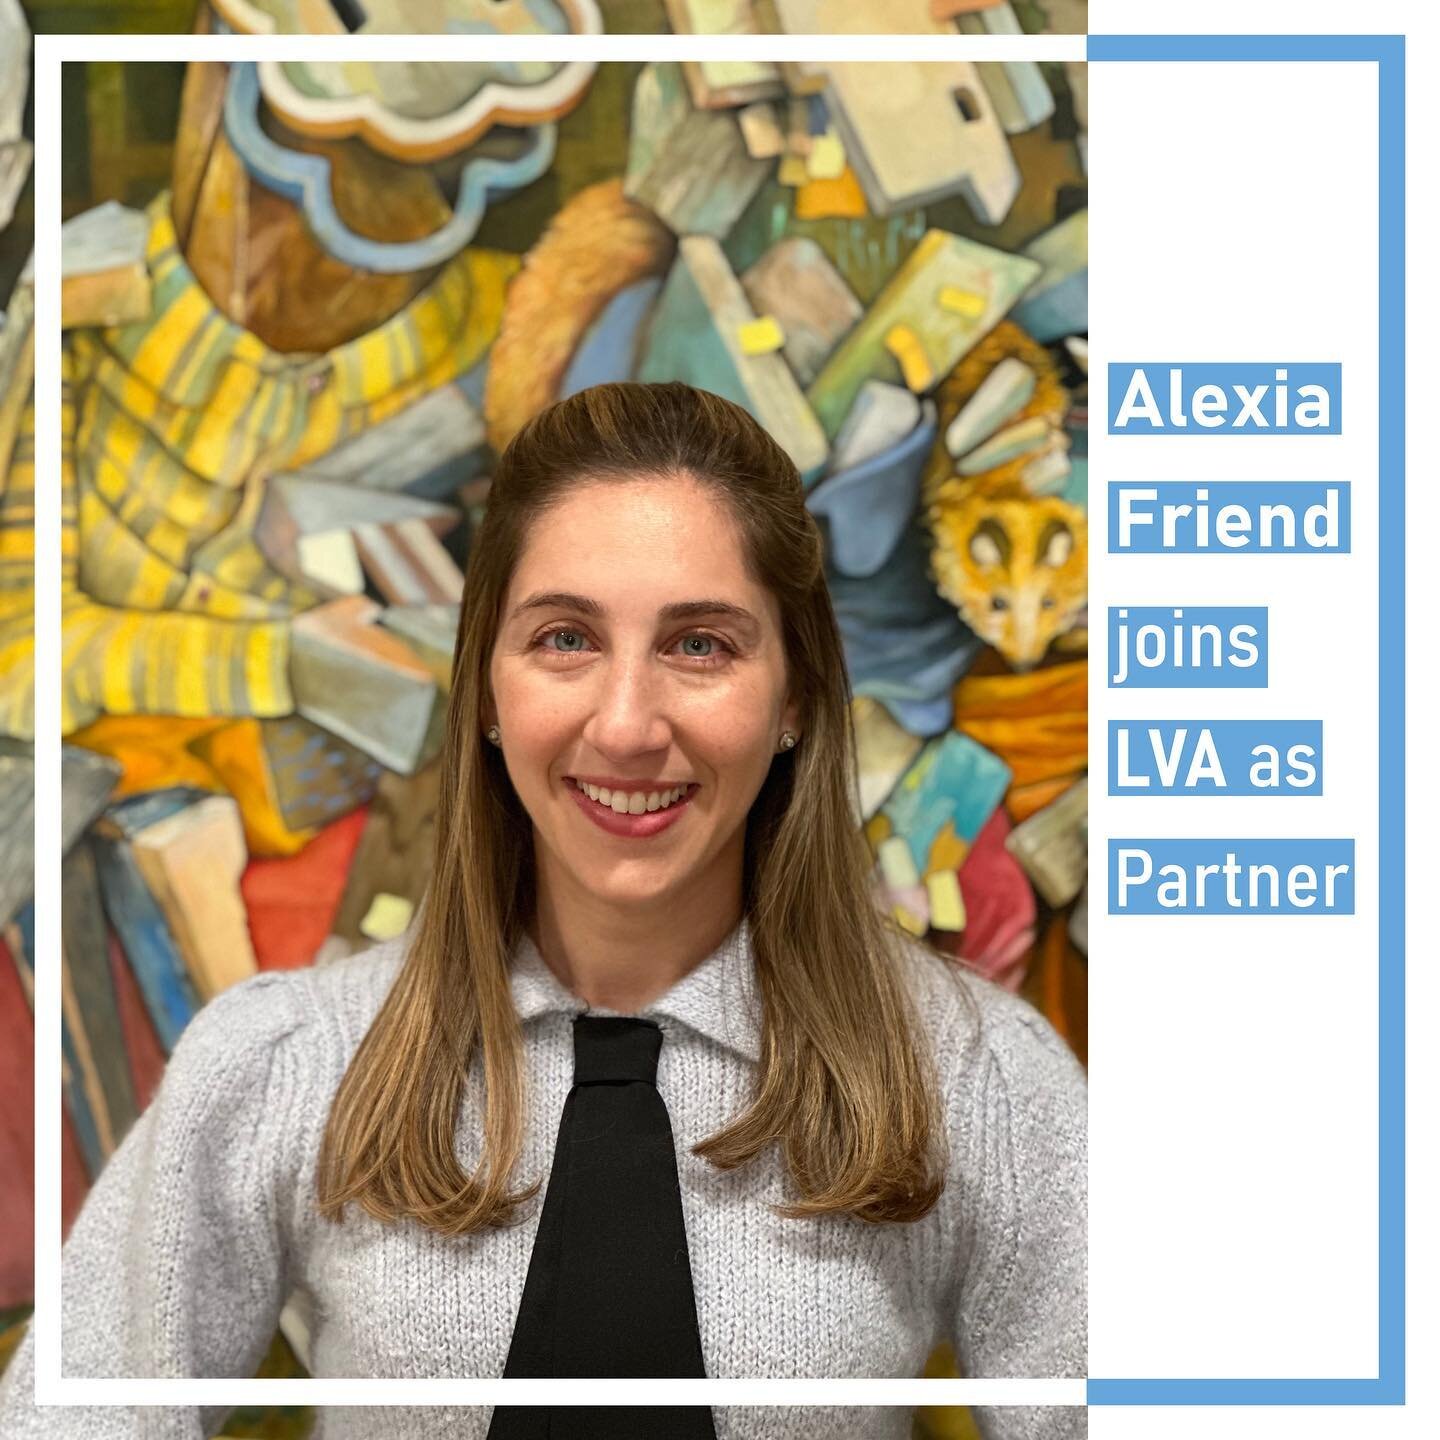 LVA Landscape Architects is excited to announce that Alexia Friend has joined as a Partner! 

Alexia is passionate about designing thoughtful landscapes within complex settings. She has extensive experience designing public parks in NYC and universit